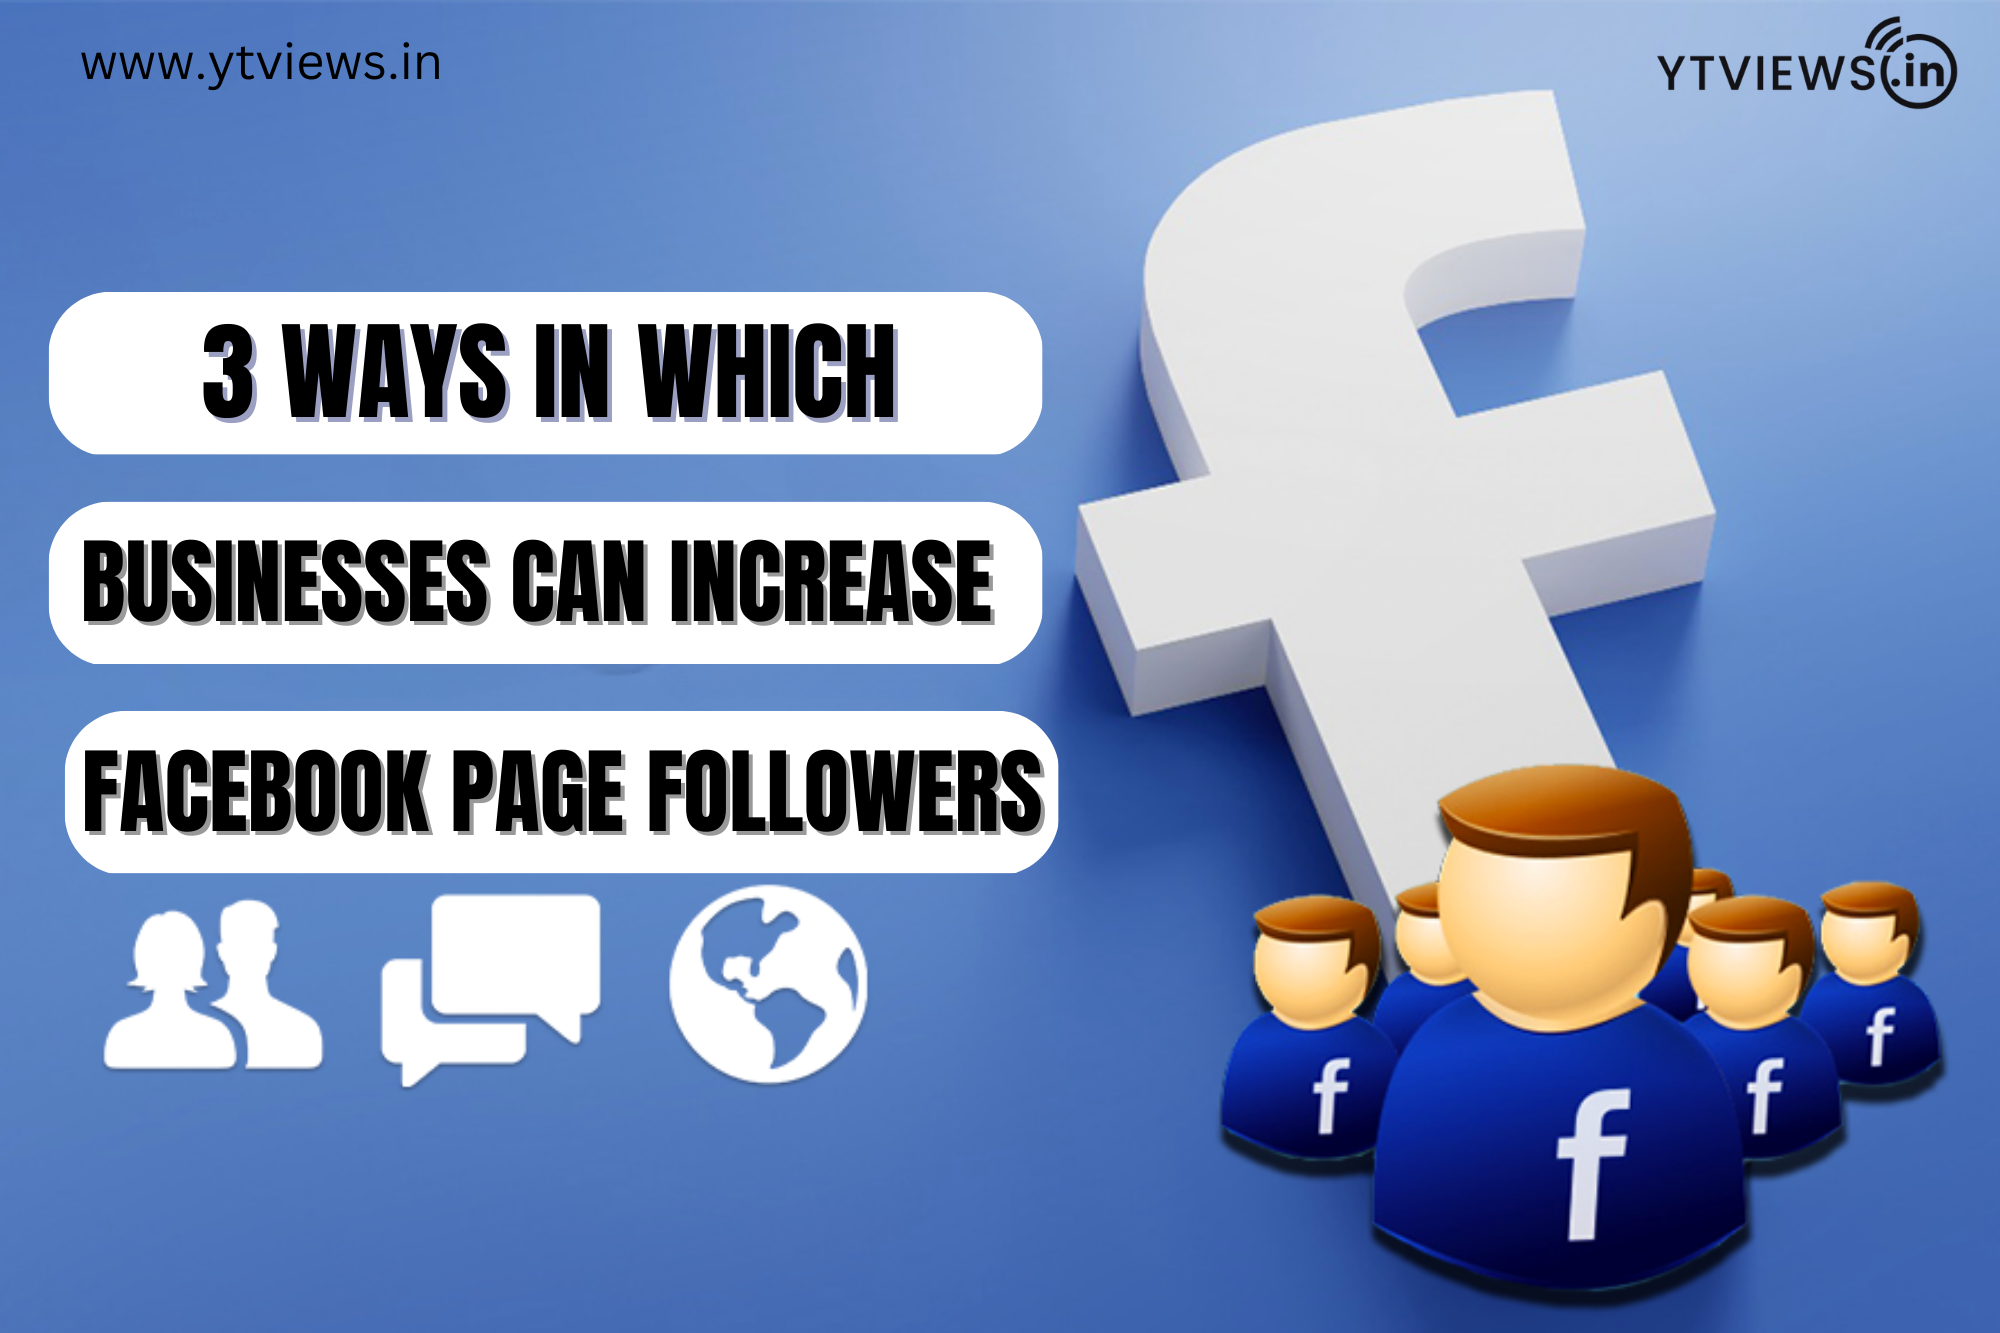 3 ways in which businesses can increase Facebook Page followers